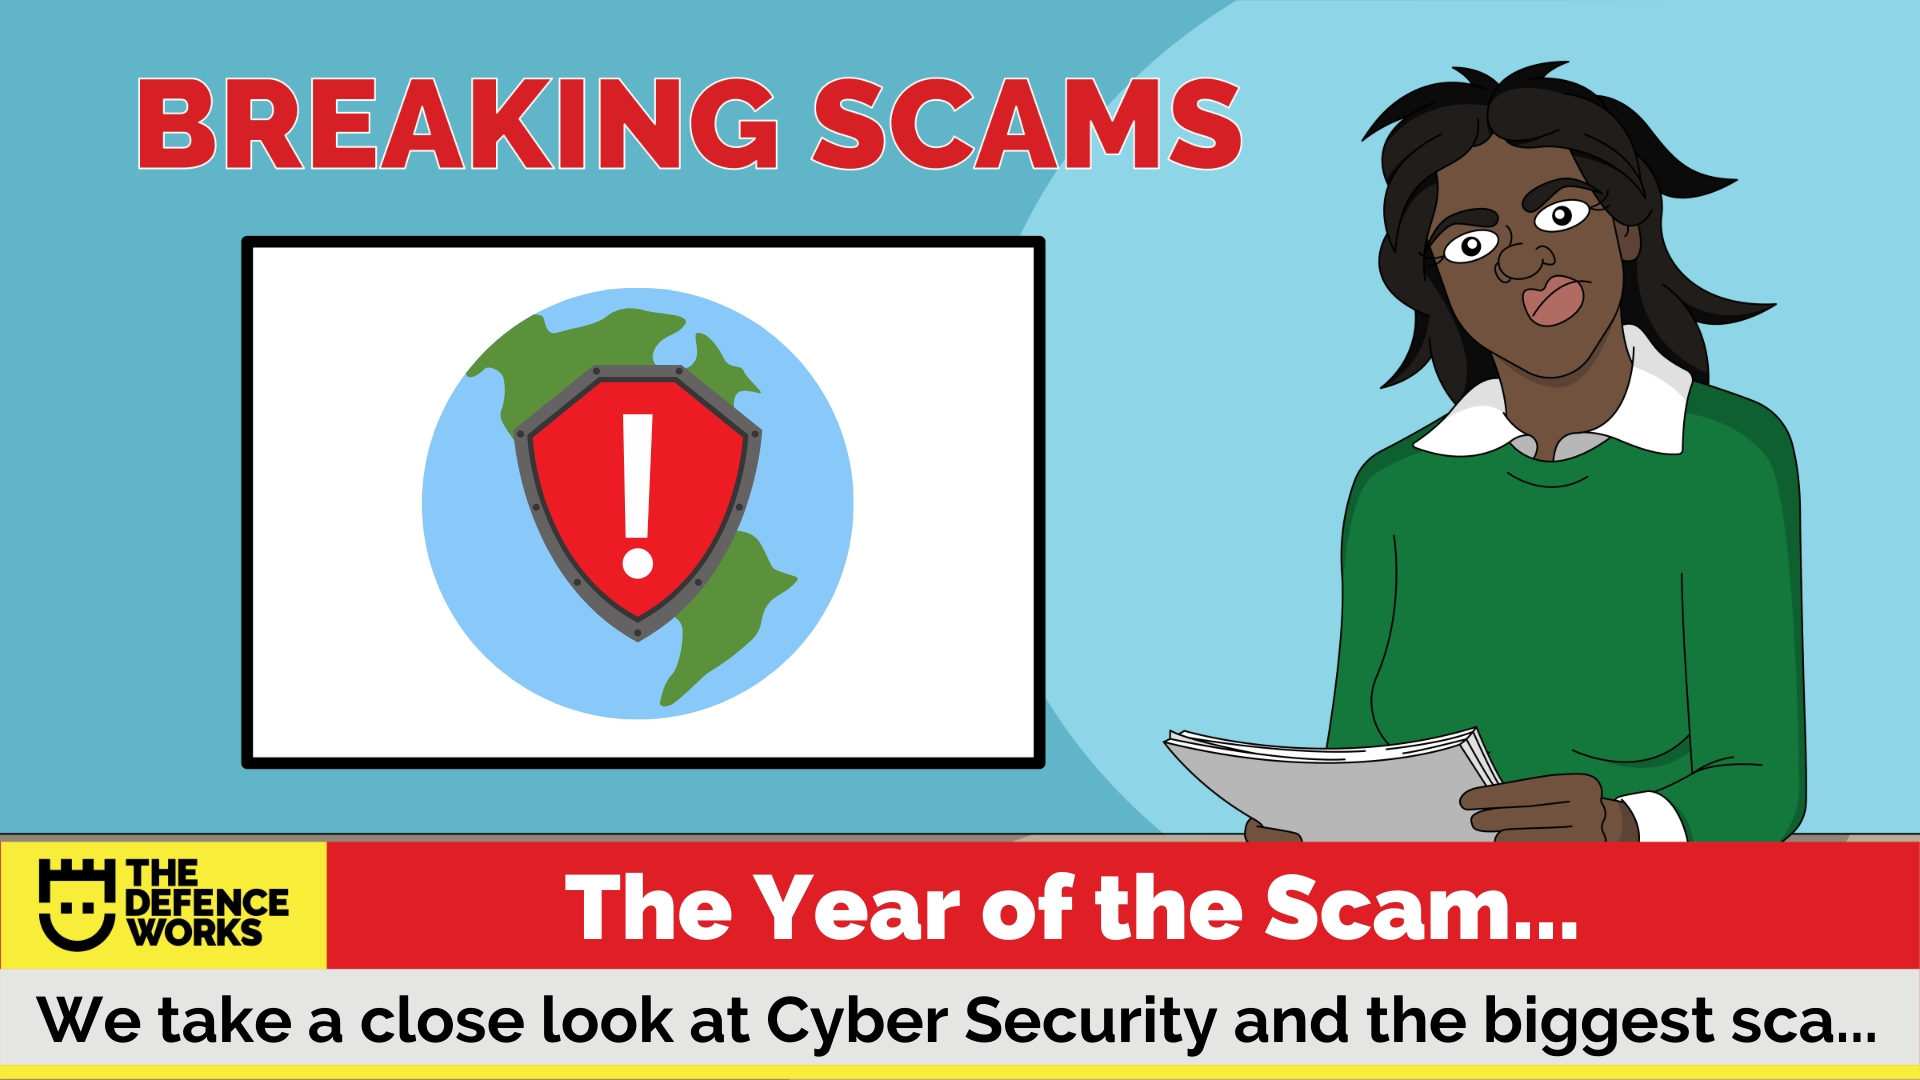 2019, the Year of the Scam